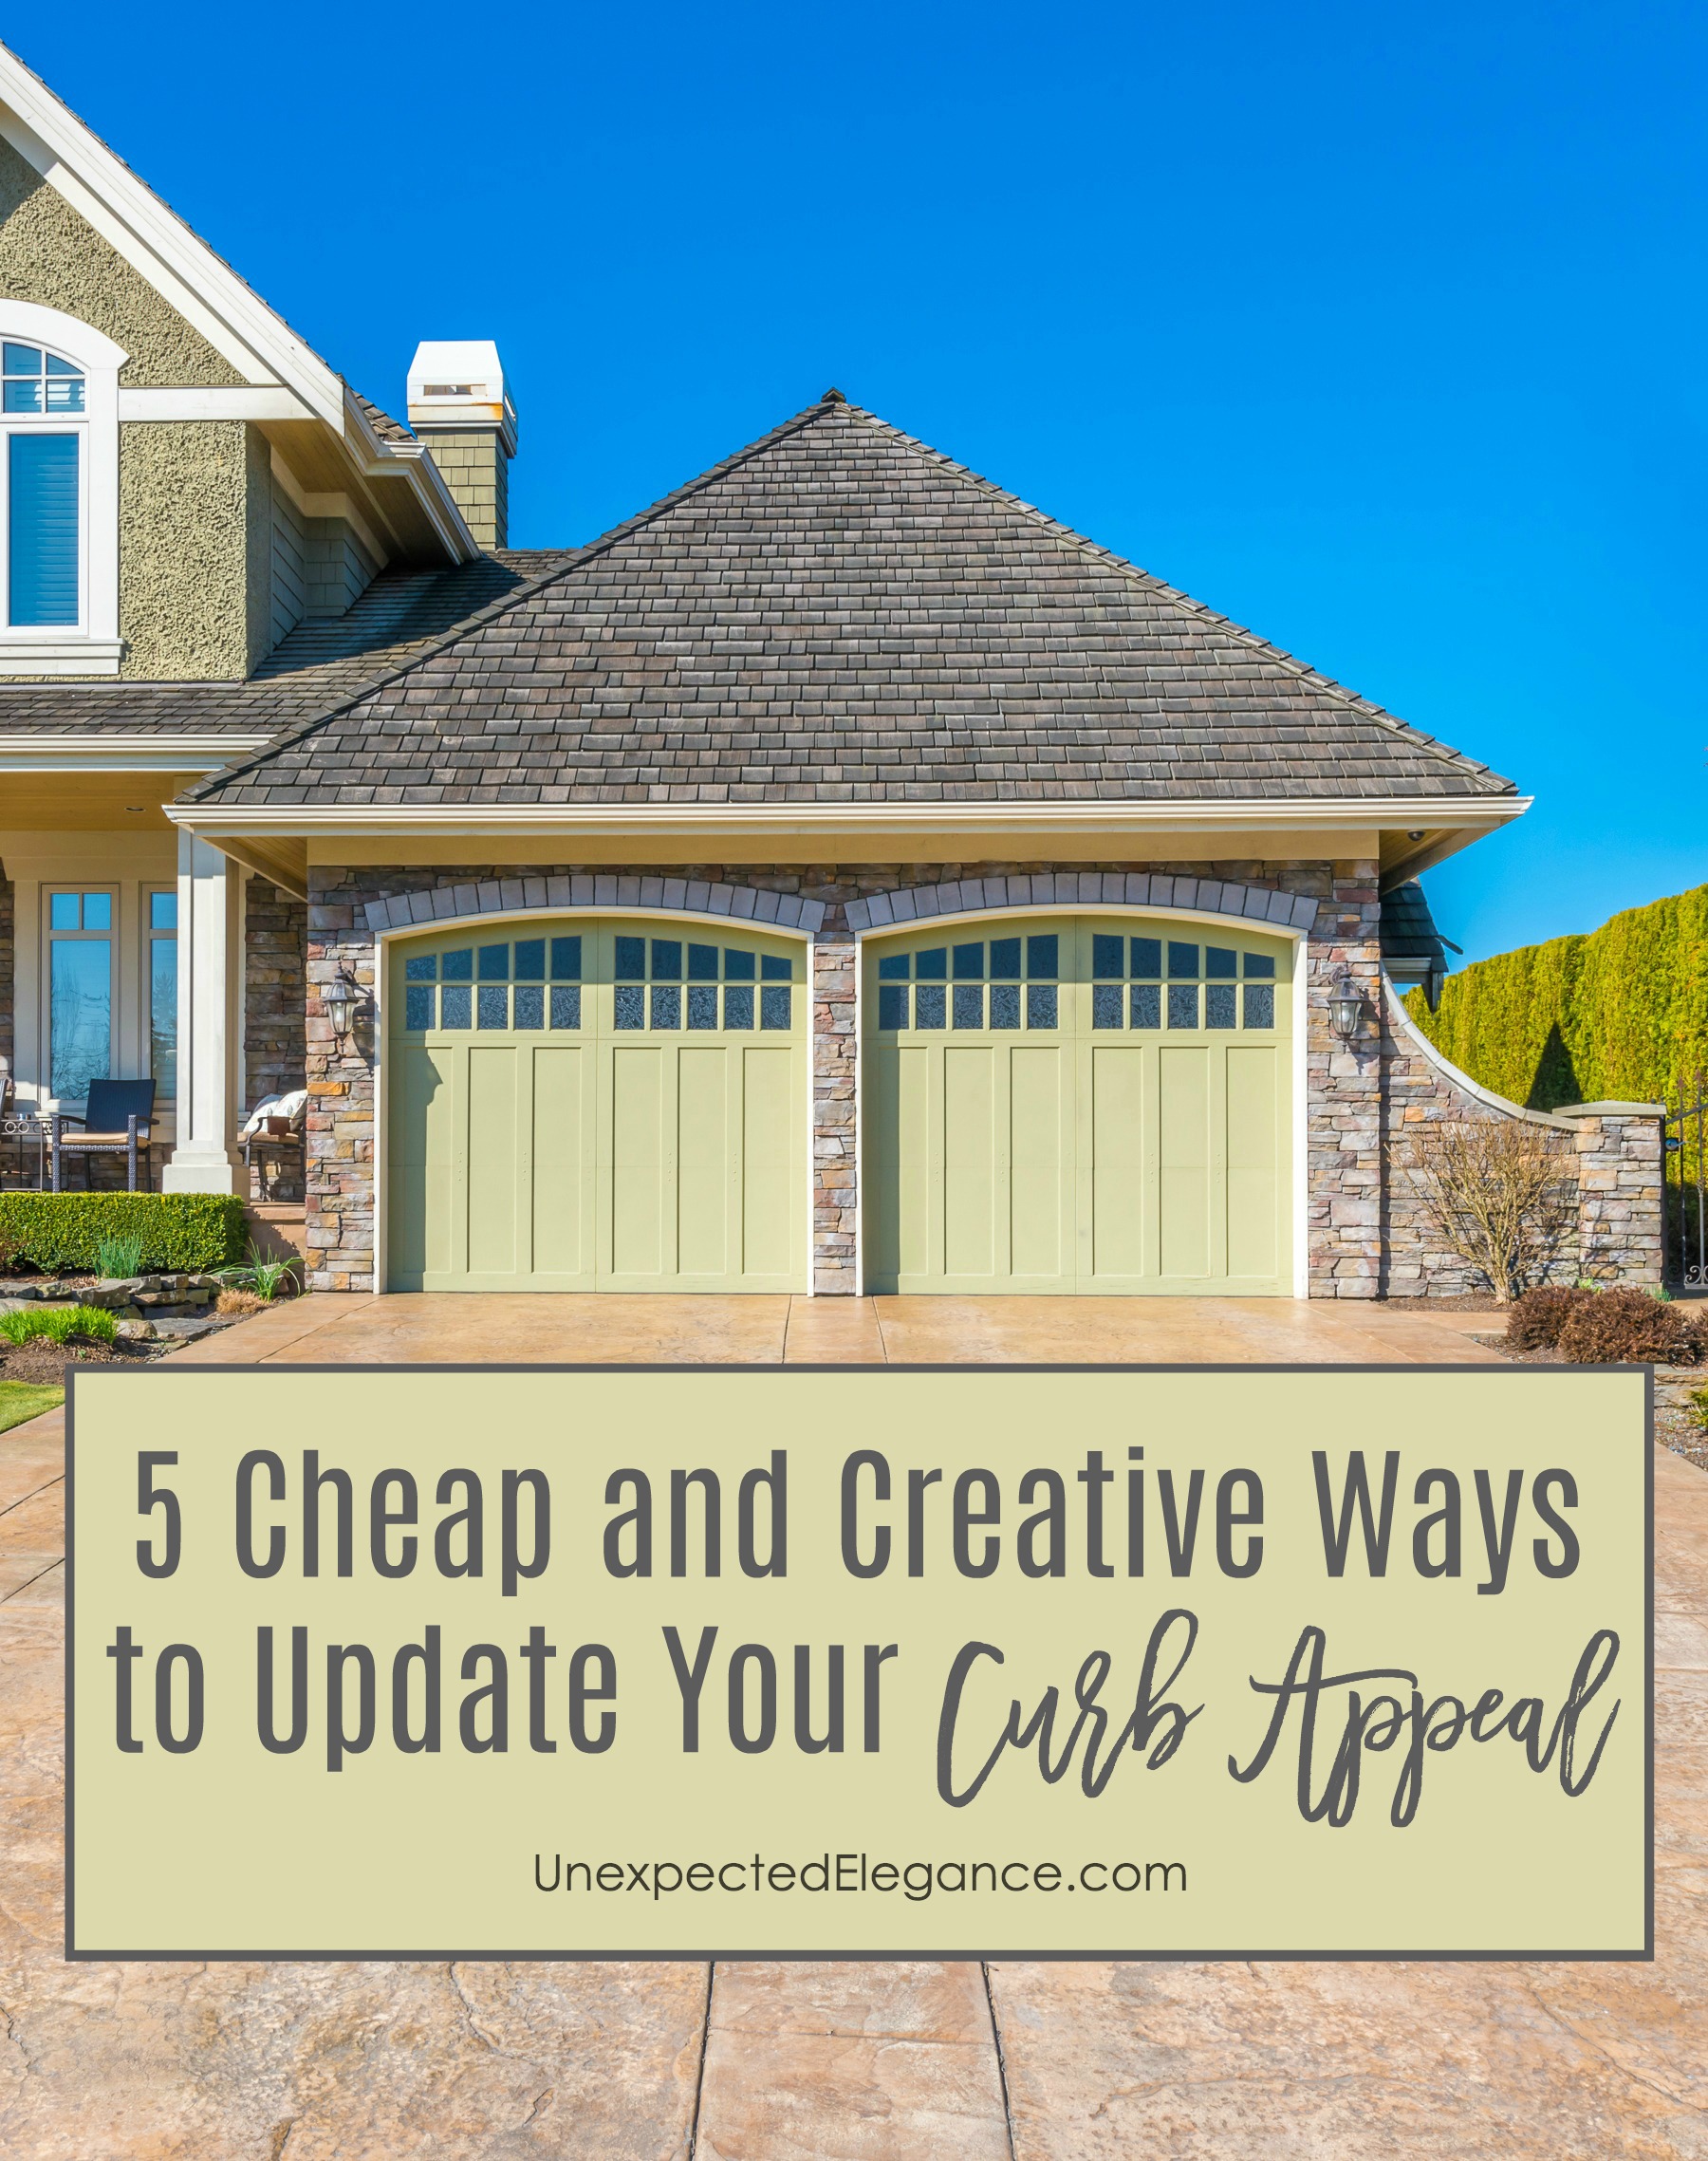 5 Cheap And Creative Ways To Update Curb Appeal Unexpected Elegance,Emilia Clarke Game Of Thrones Meme